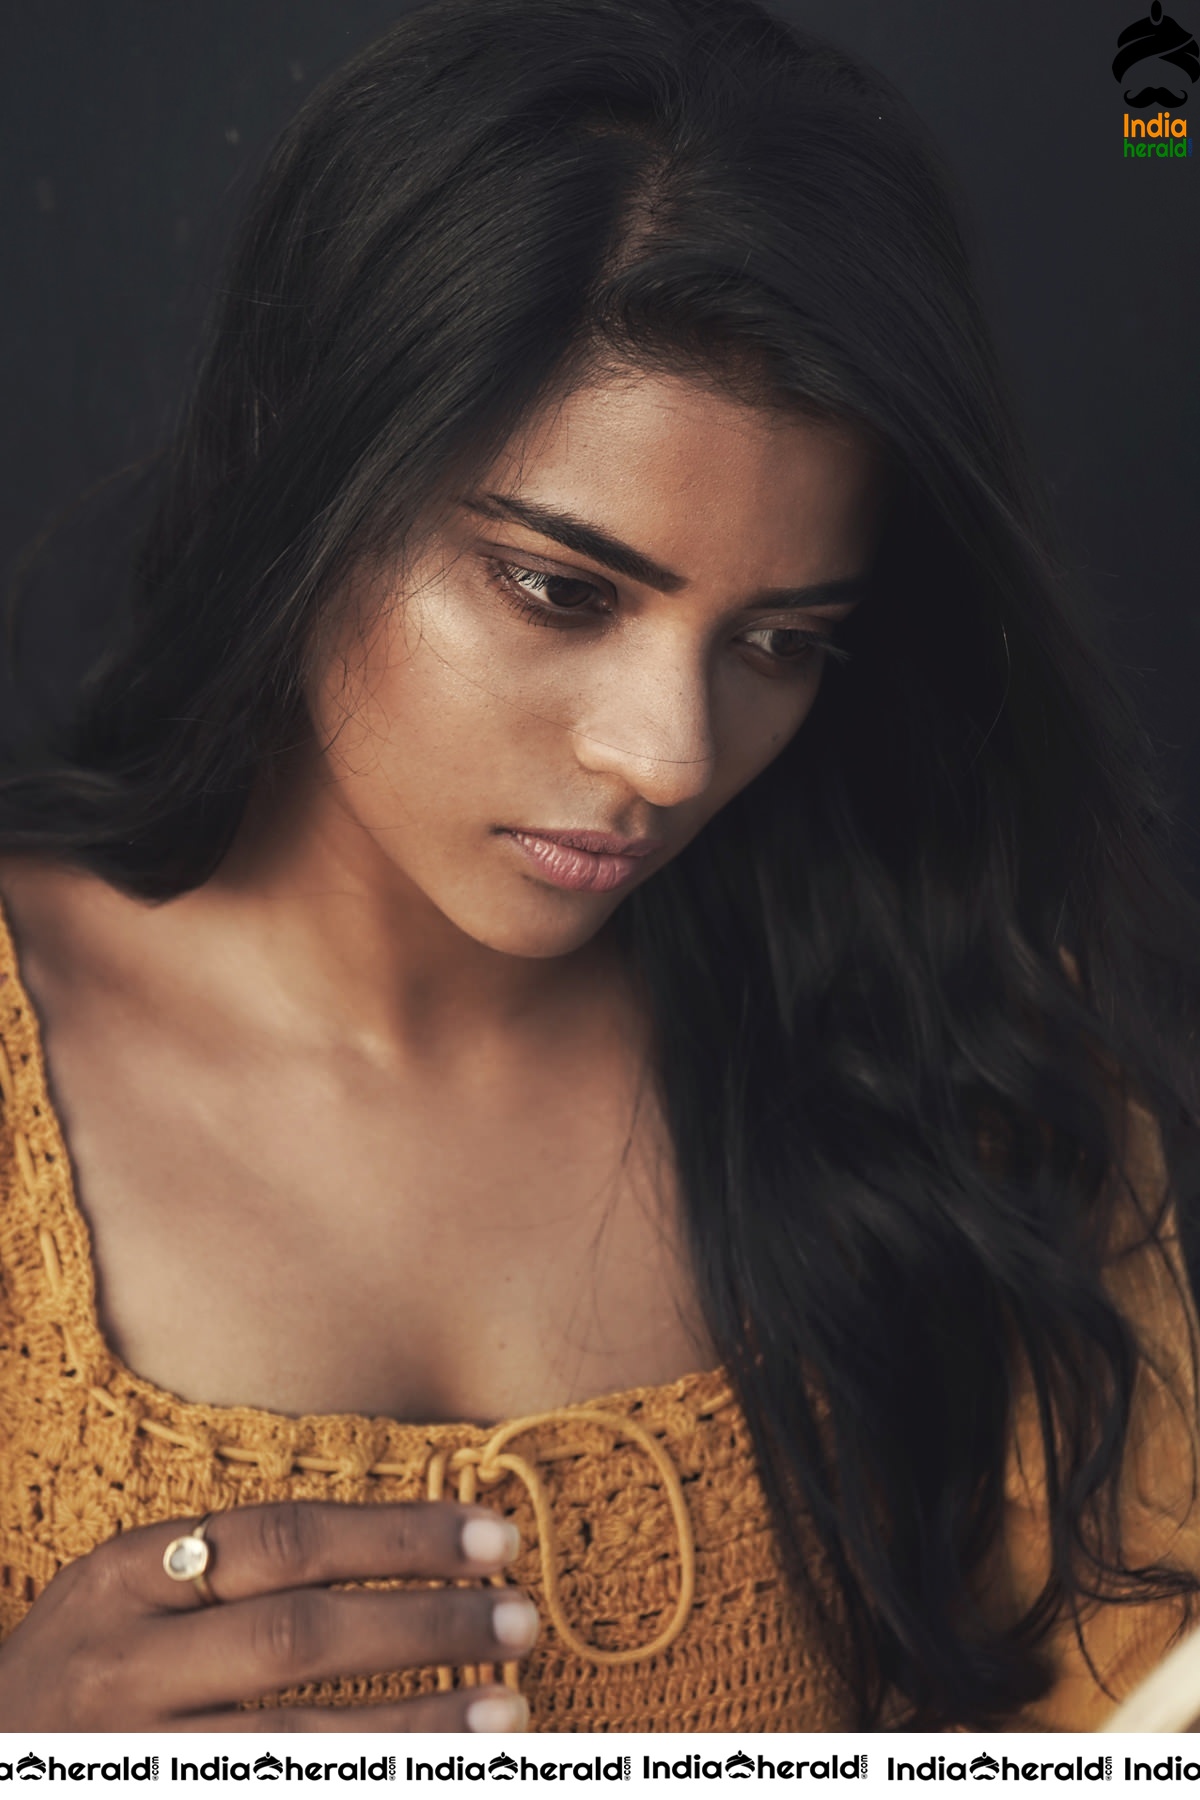 Aishwarya Rajesh Looking Snazzy From Her Latest Photoshoot